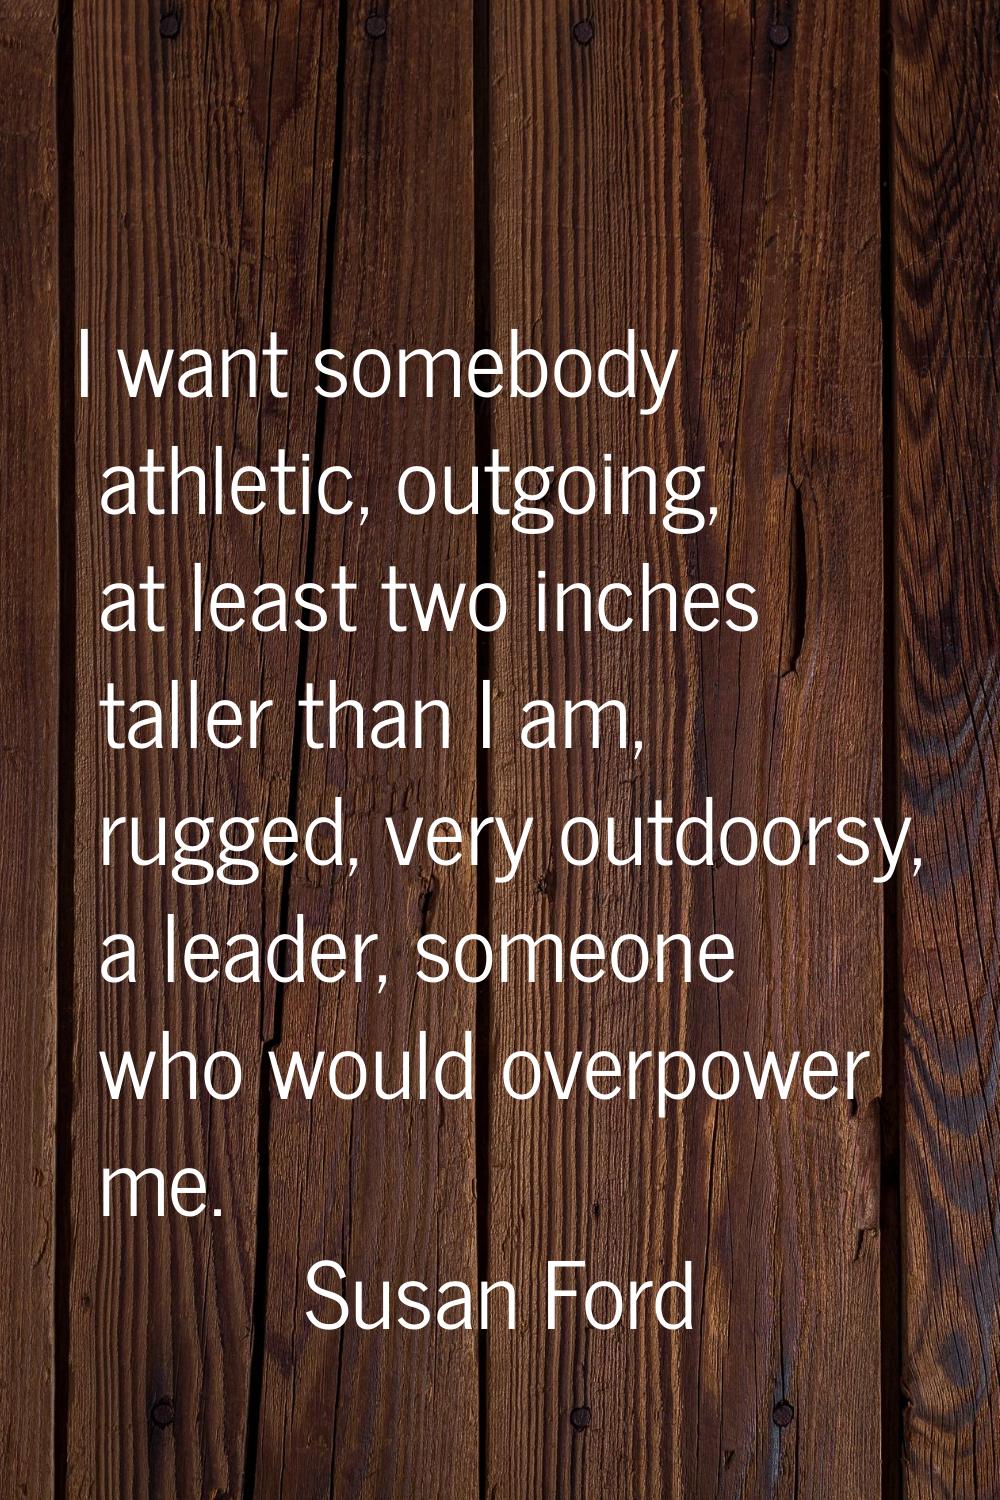 I want somebody athletic, outgoing, at least two inches taller than I am, rugged, very outdoorsy, a